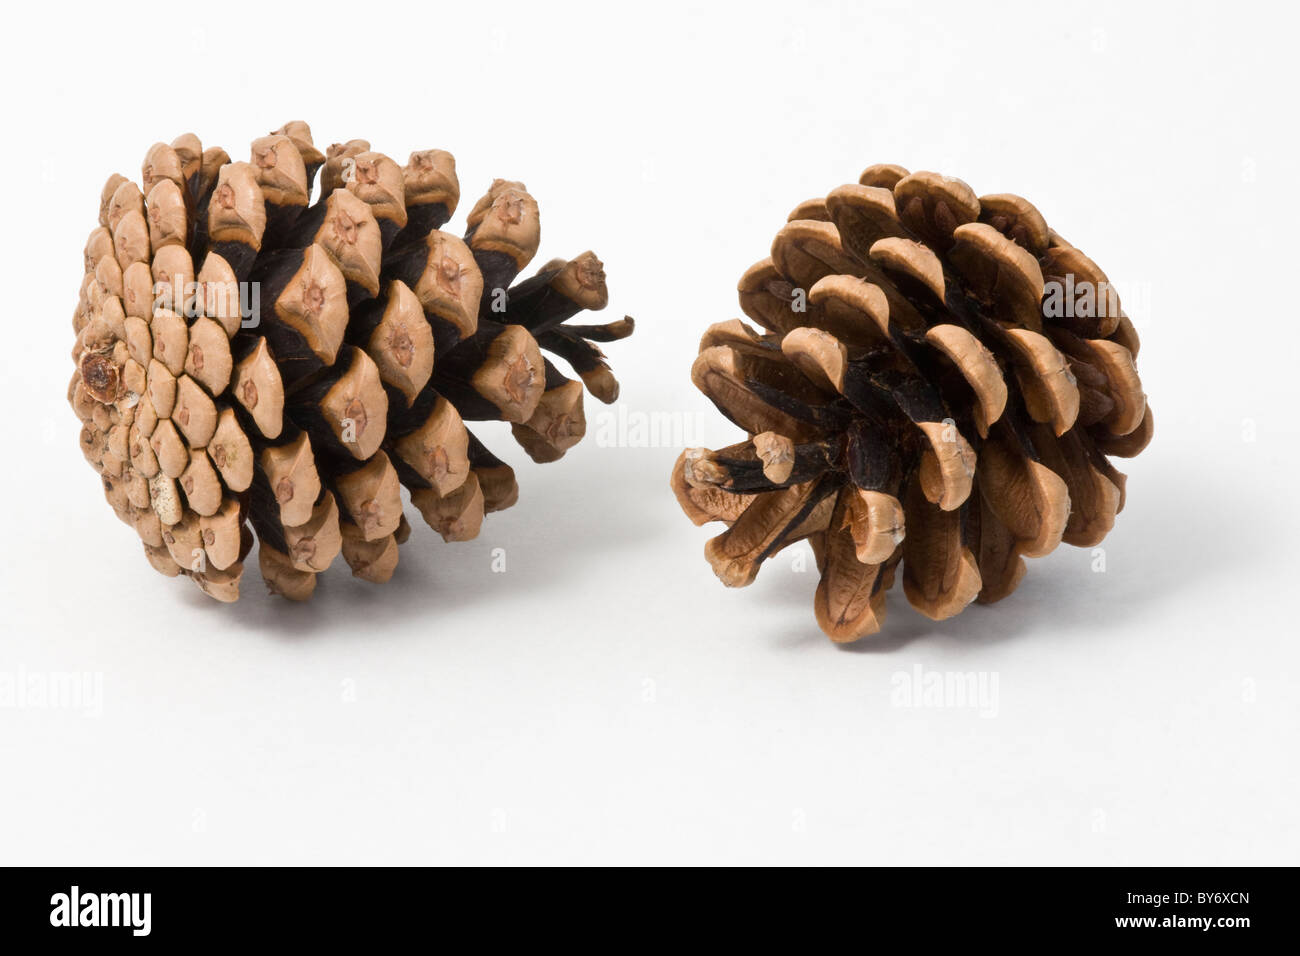 Pine cone on a white background. The cones are from a Scots Pine tree. Stock Photo